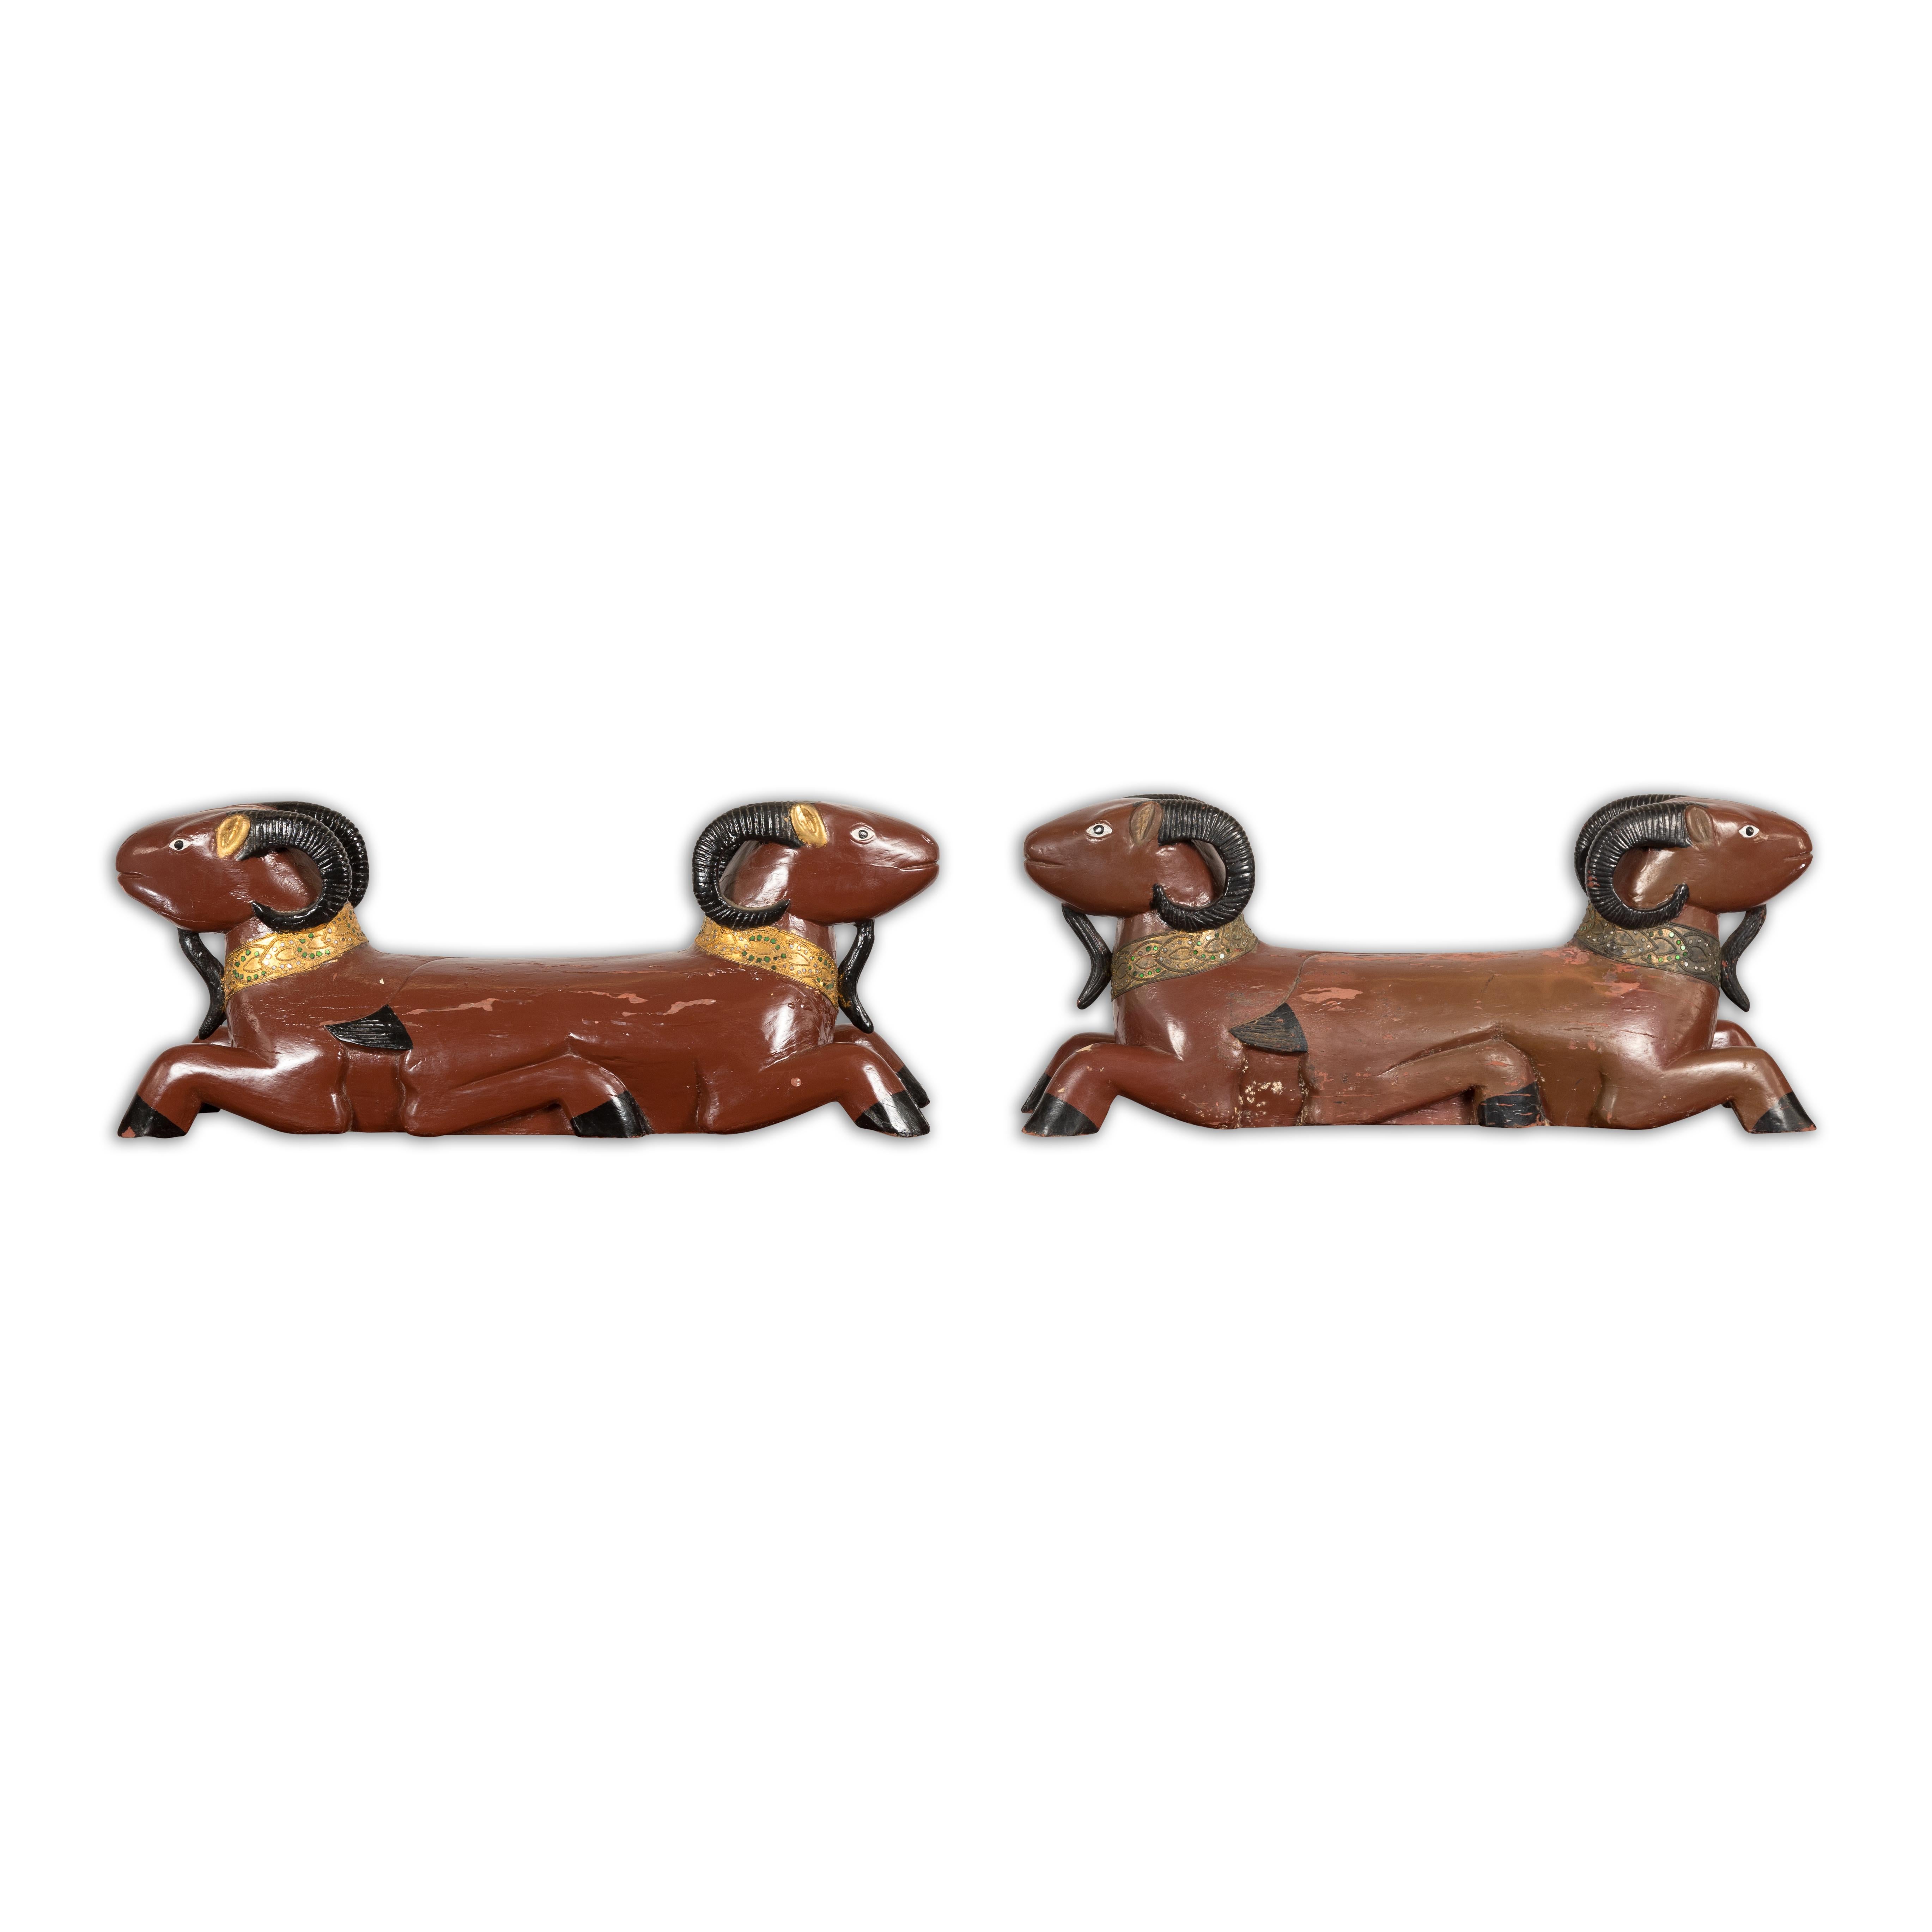 Pair of Vintage Northern Thai Double Ram Sculptures with Reddish Brown Lacquer For Sale 11